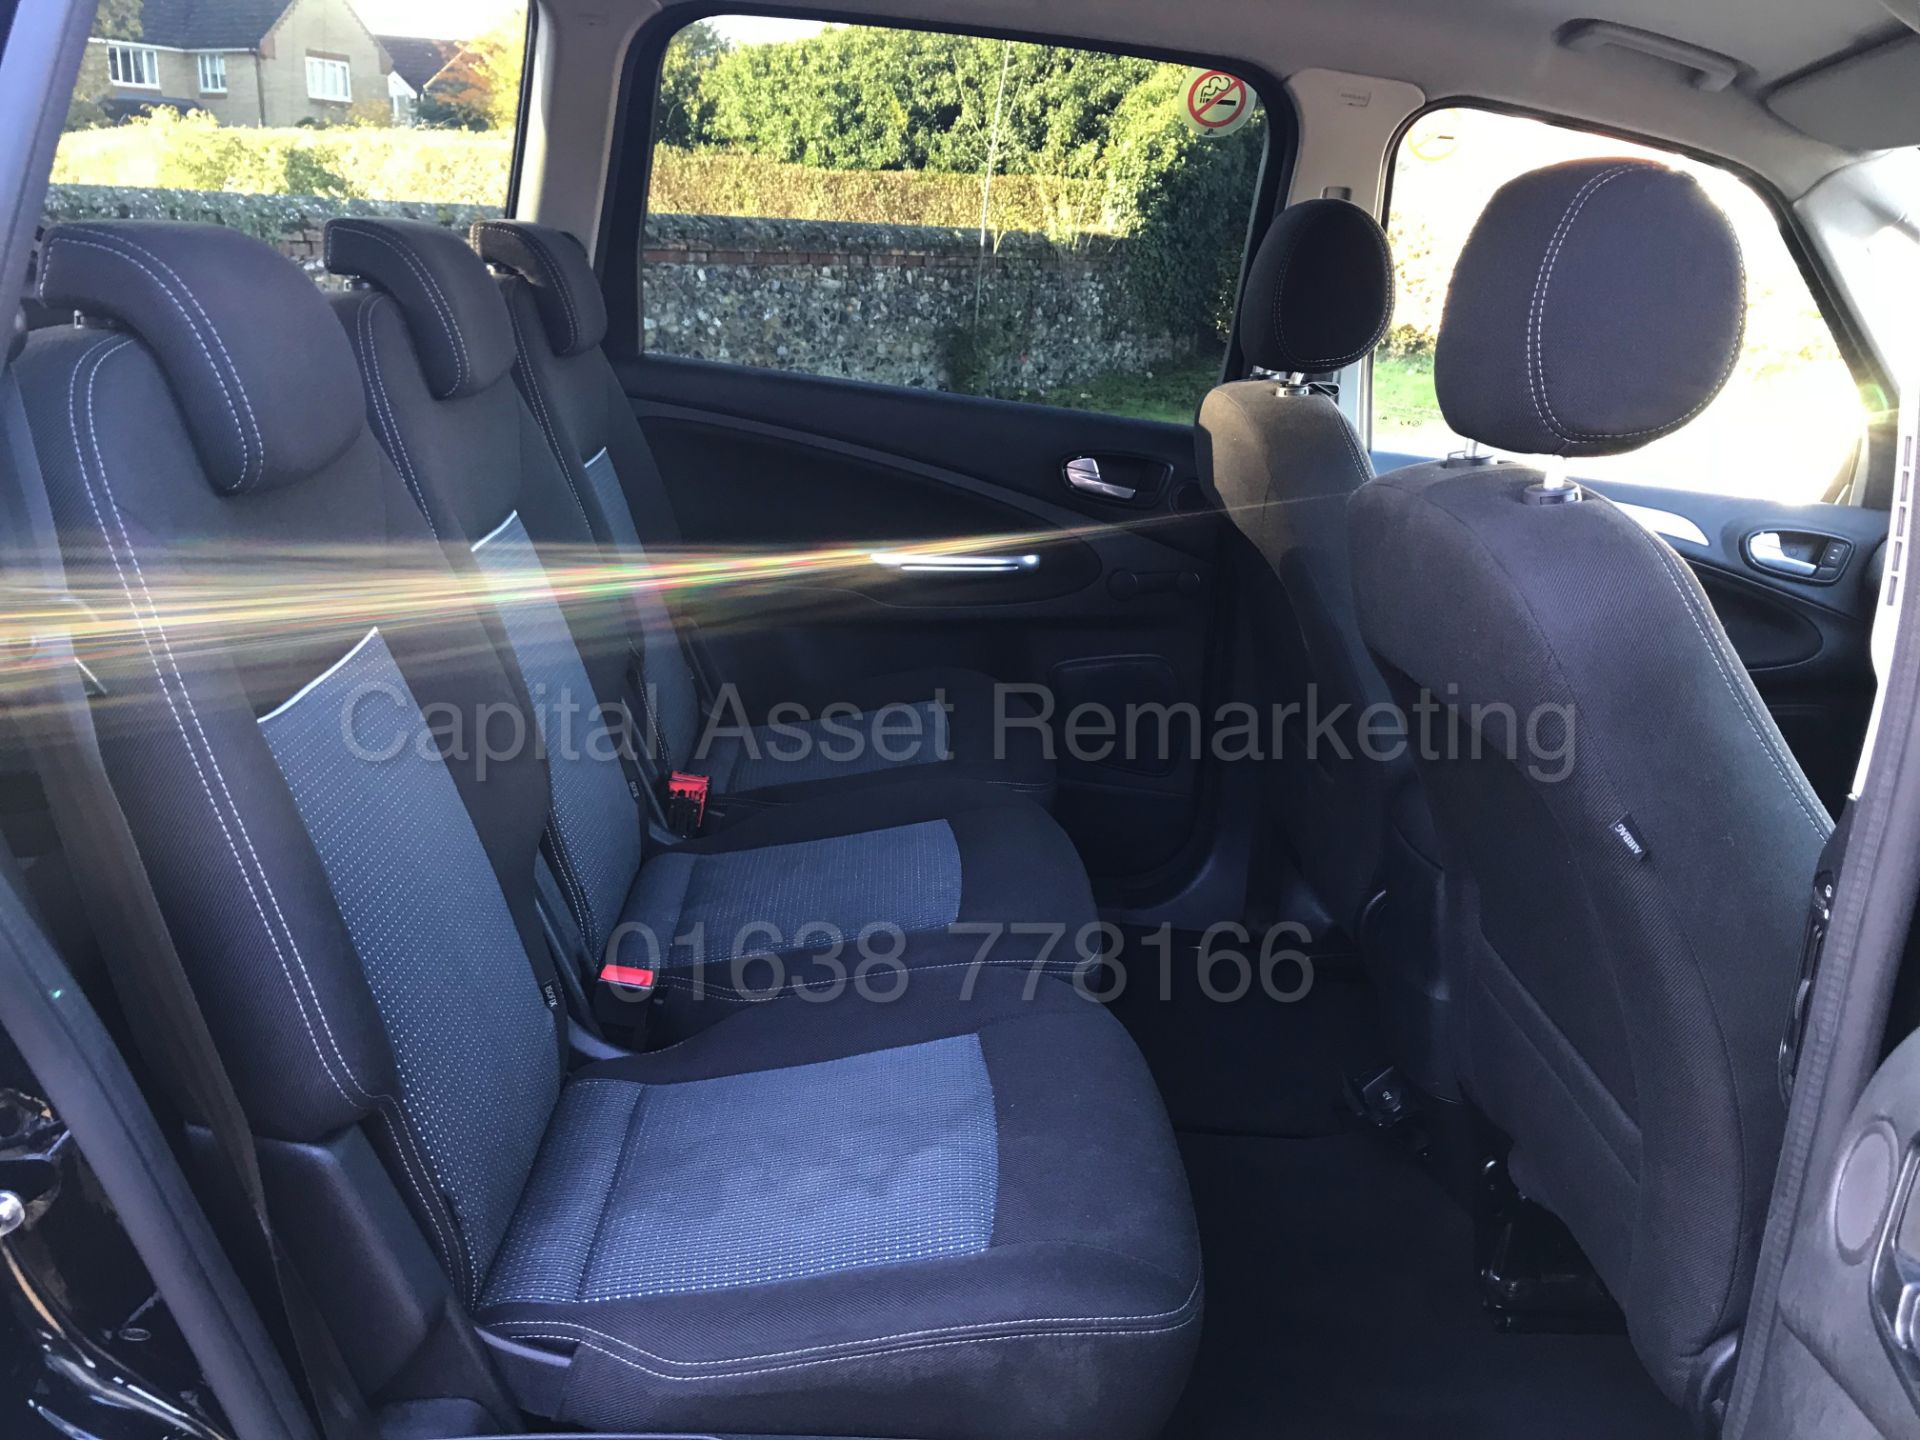 (On Sale) FORD GALAXY 'ZETEC' 7 SEATER MPV (2013) '2.0 TDCI -140 BHP' (1 OWNER) *FULL HISTORY* - Image 17 of 29